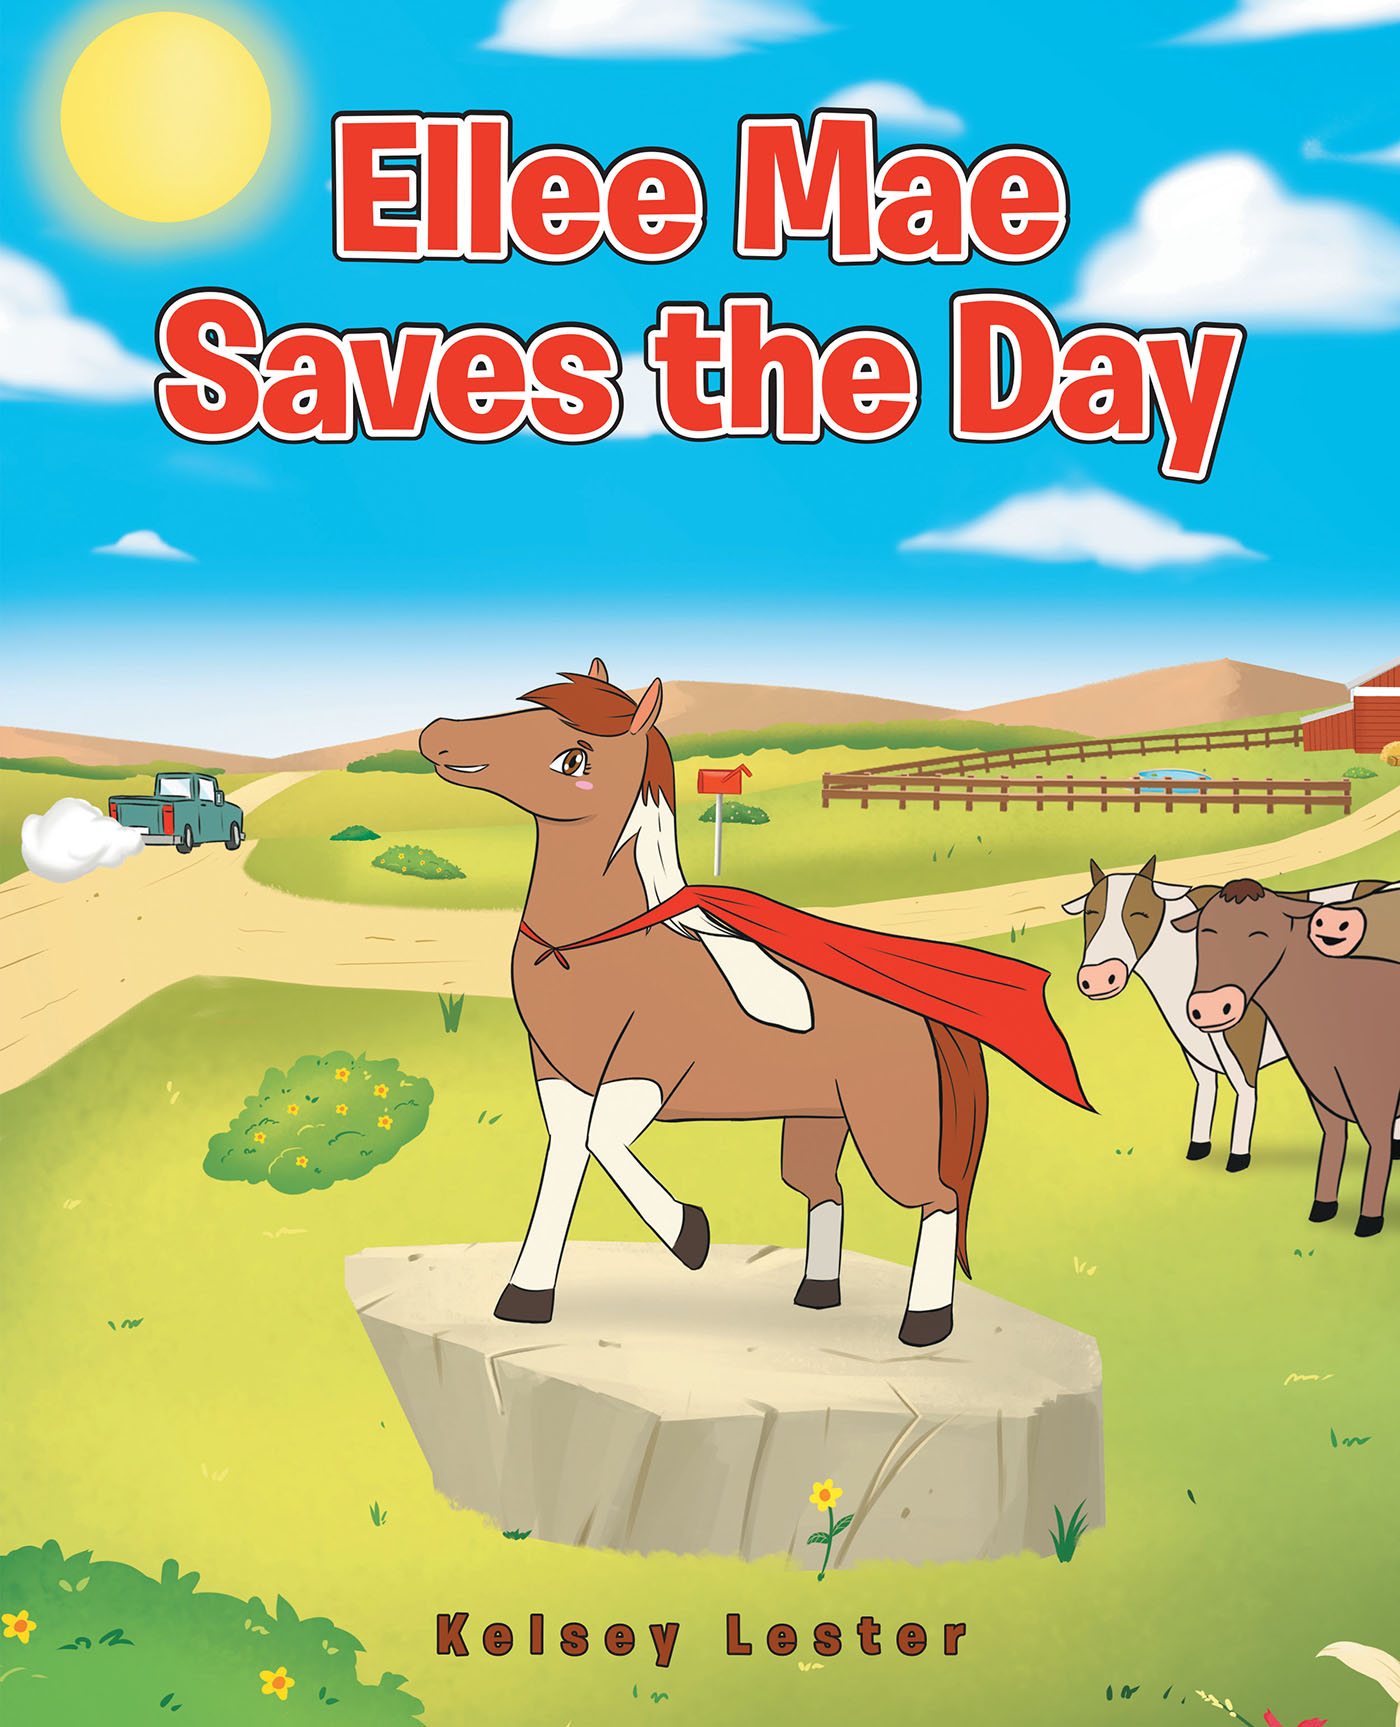 Author Kelsey Lester’s Newly Released, "Ellee Mae Saves the Day," Follows a Brave Horse Who Rises Up to the Challenge to Save Her Friends Who've Been Left in the Road